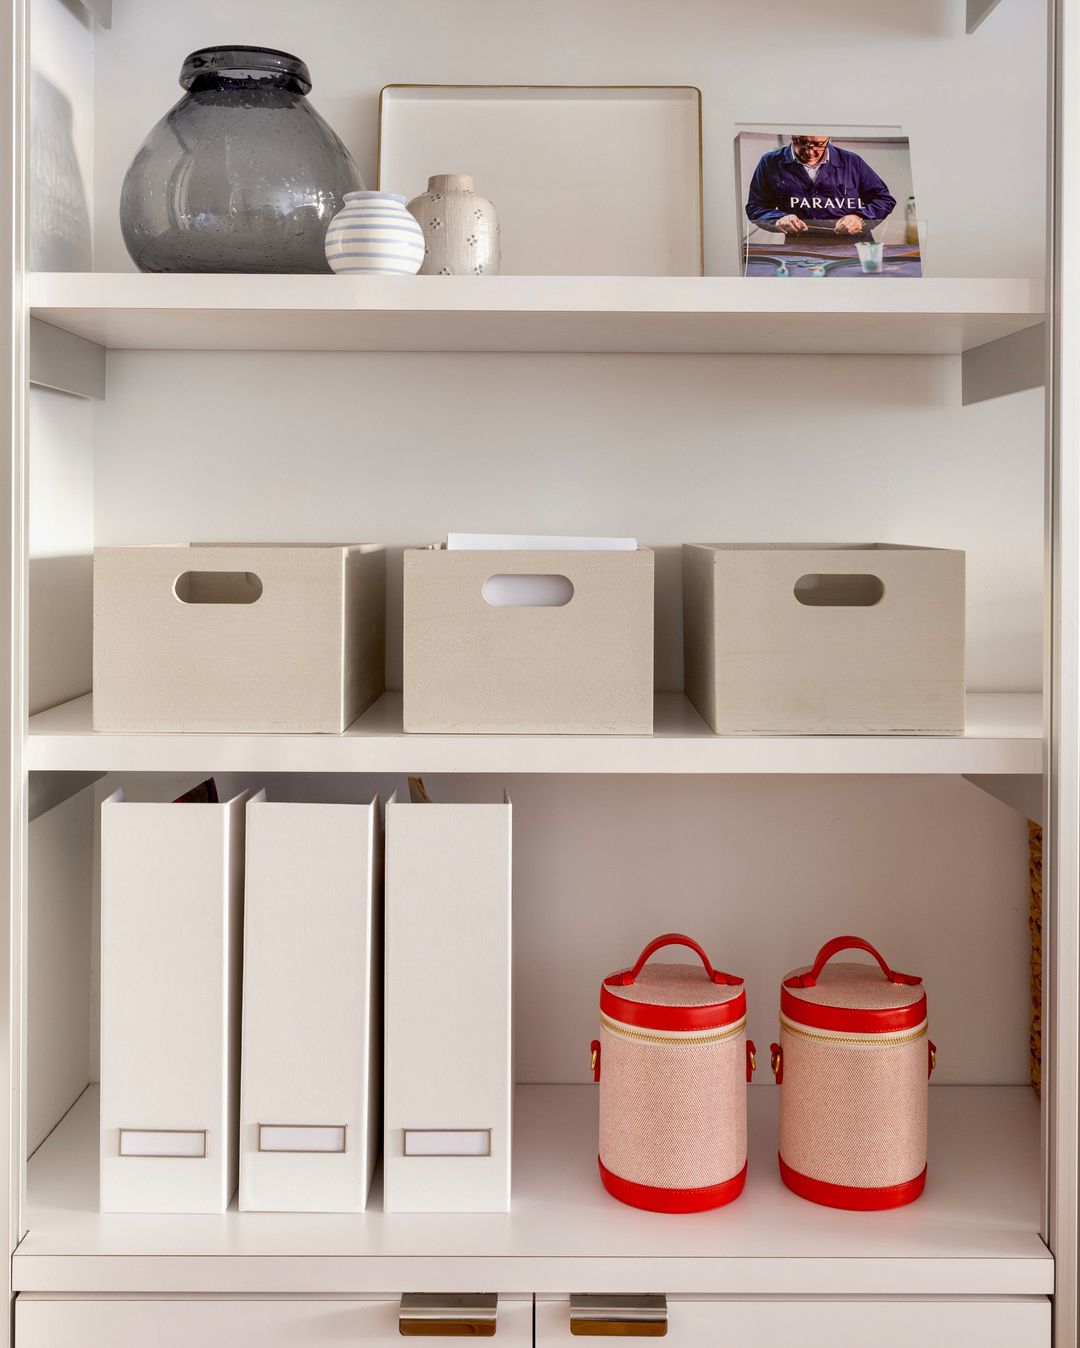 File holders and storage bins on open shelves